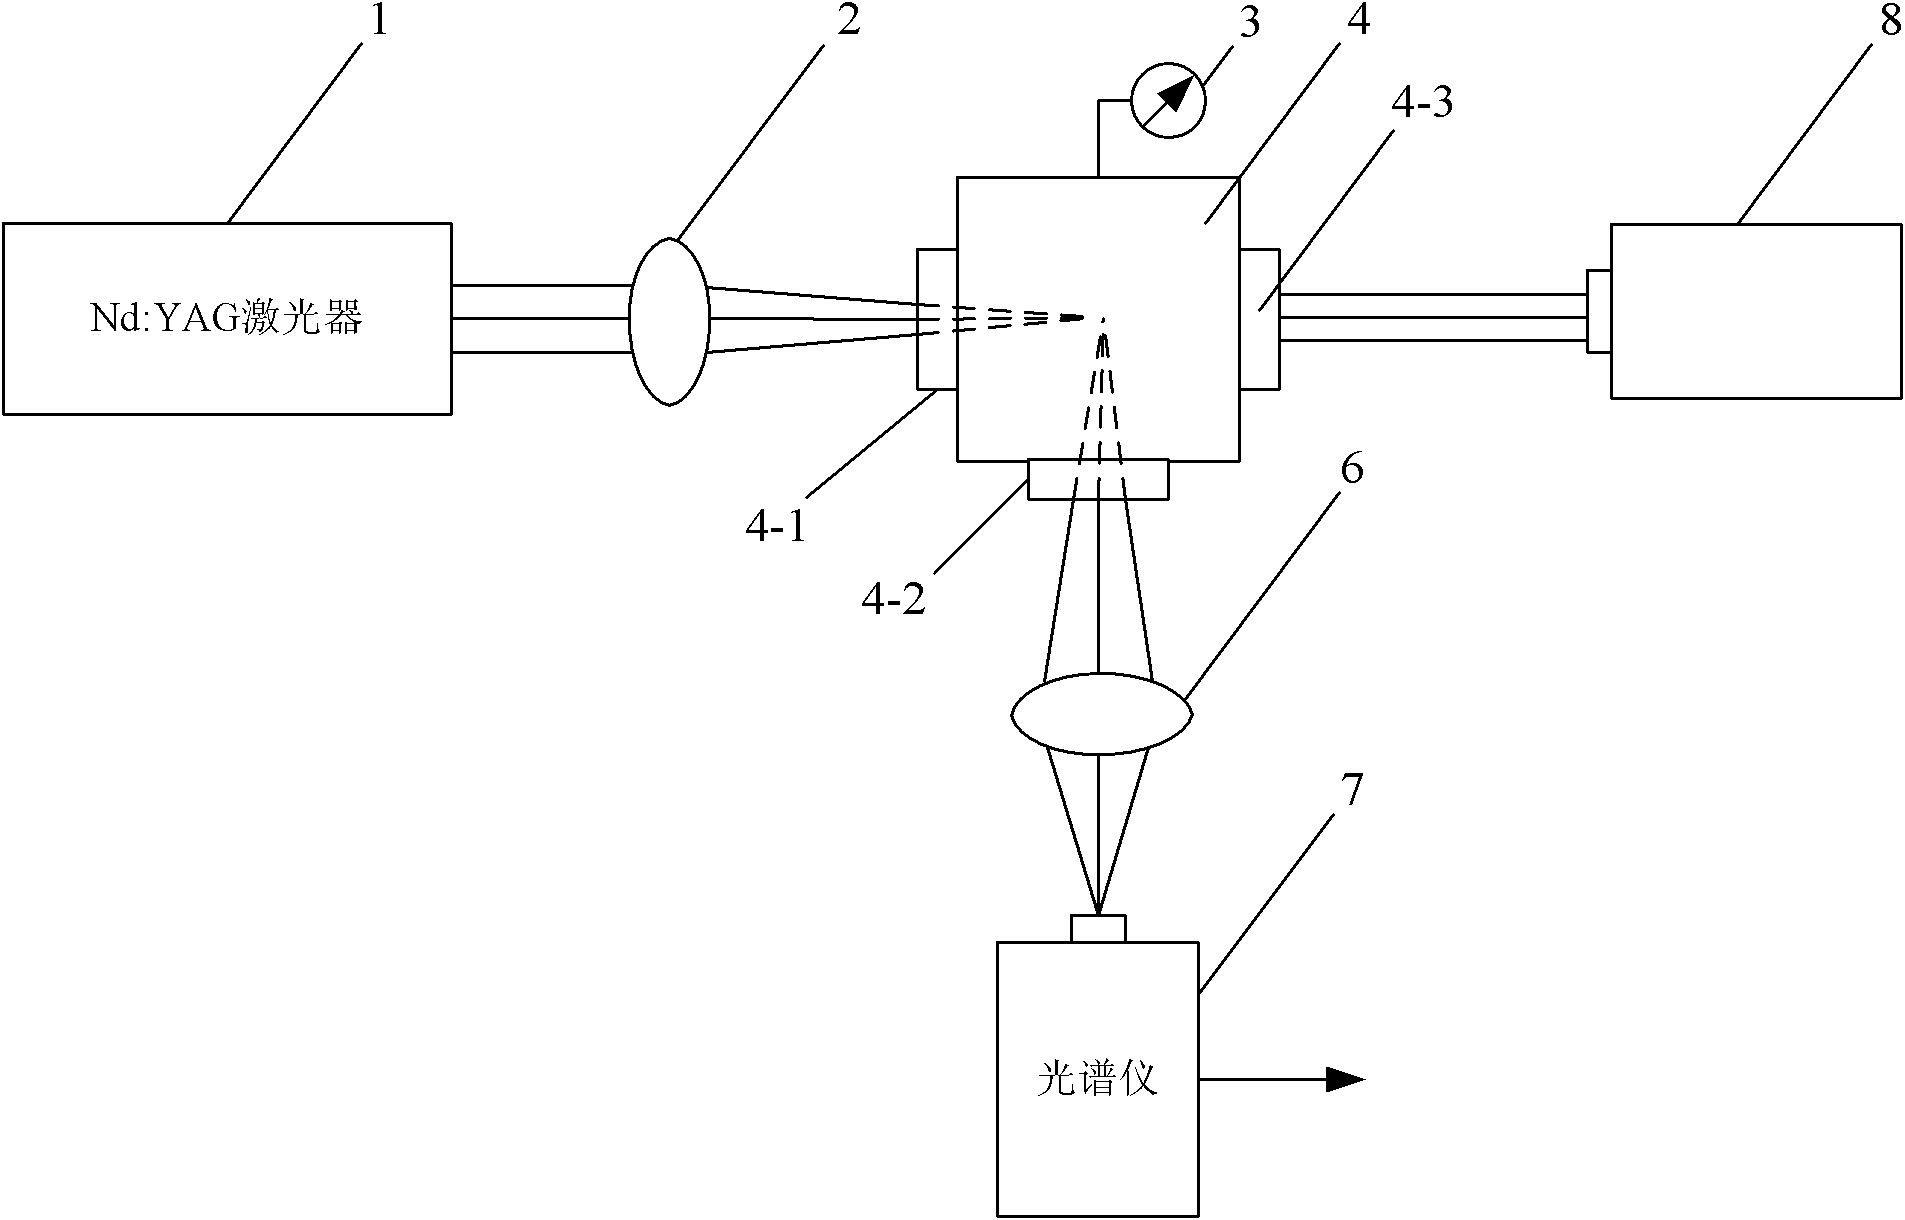 Apparatus and method for measuring electron temperature of plasma in gas based on laser induction